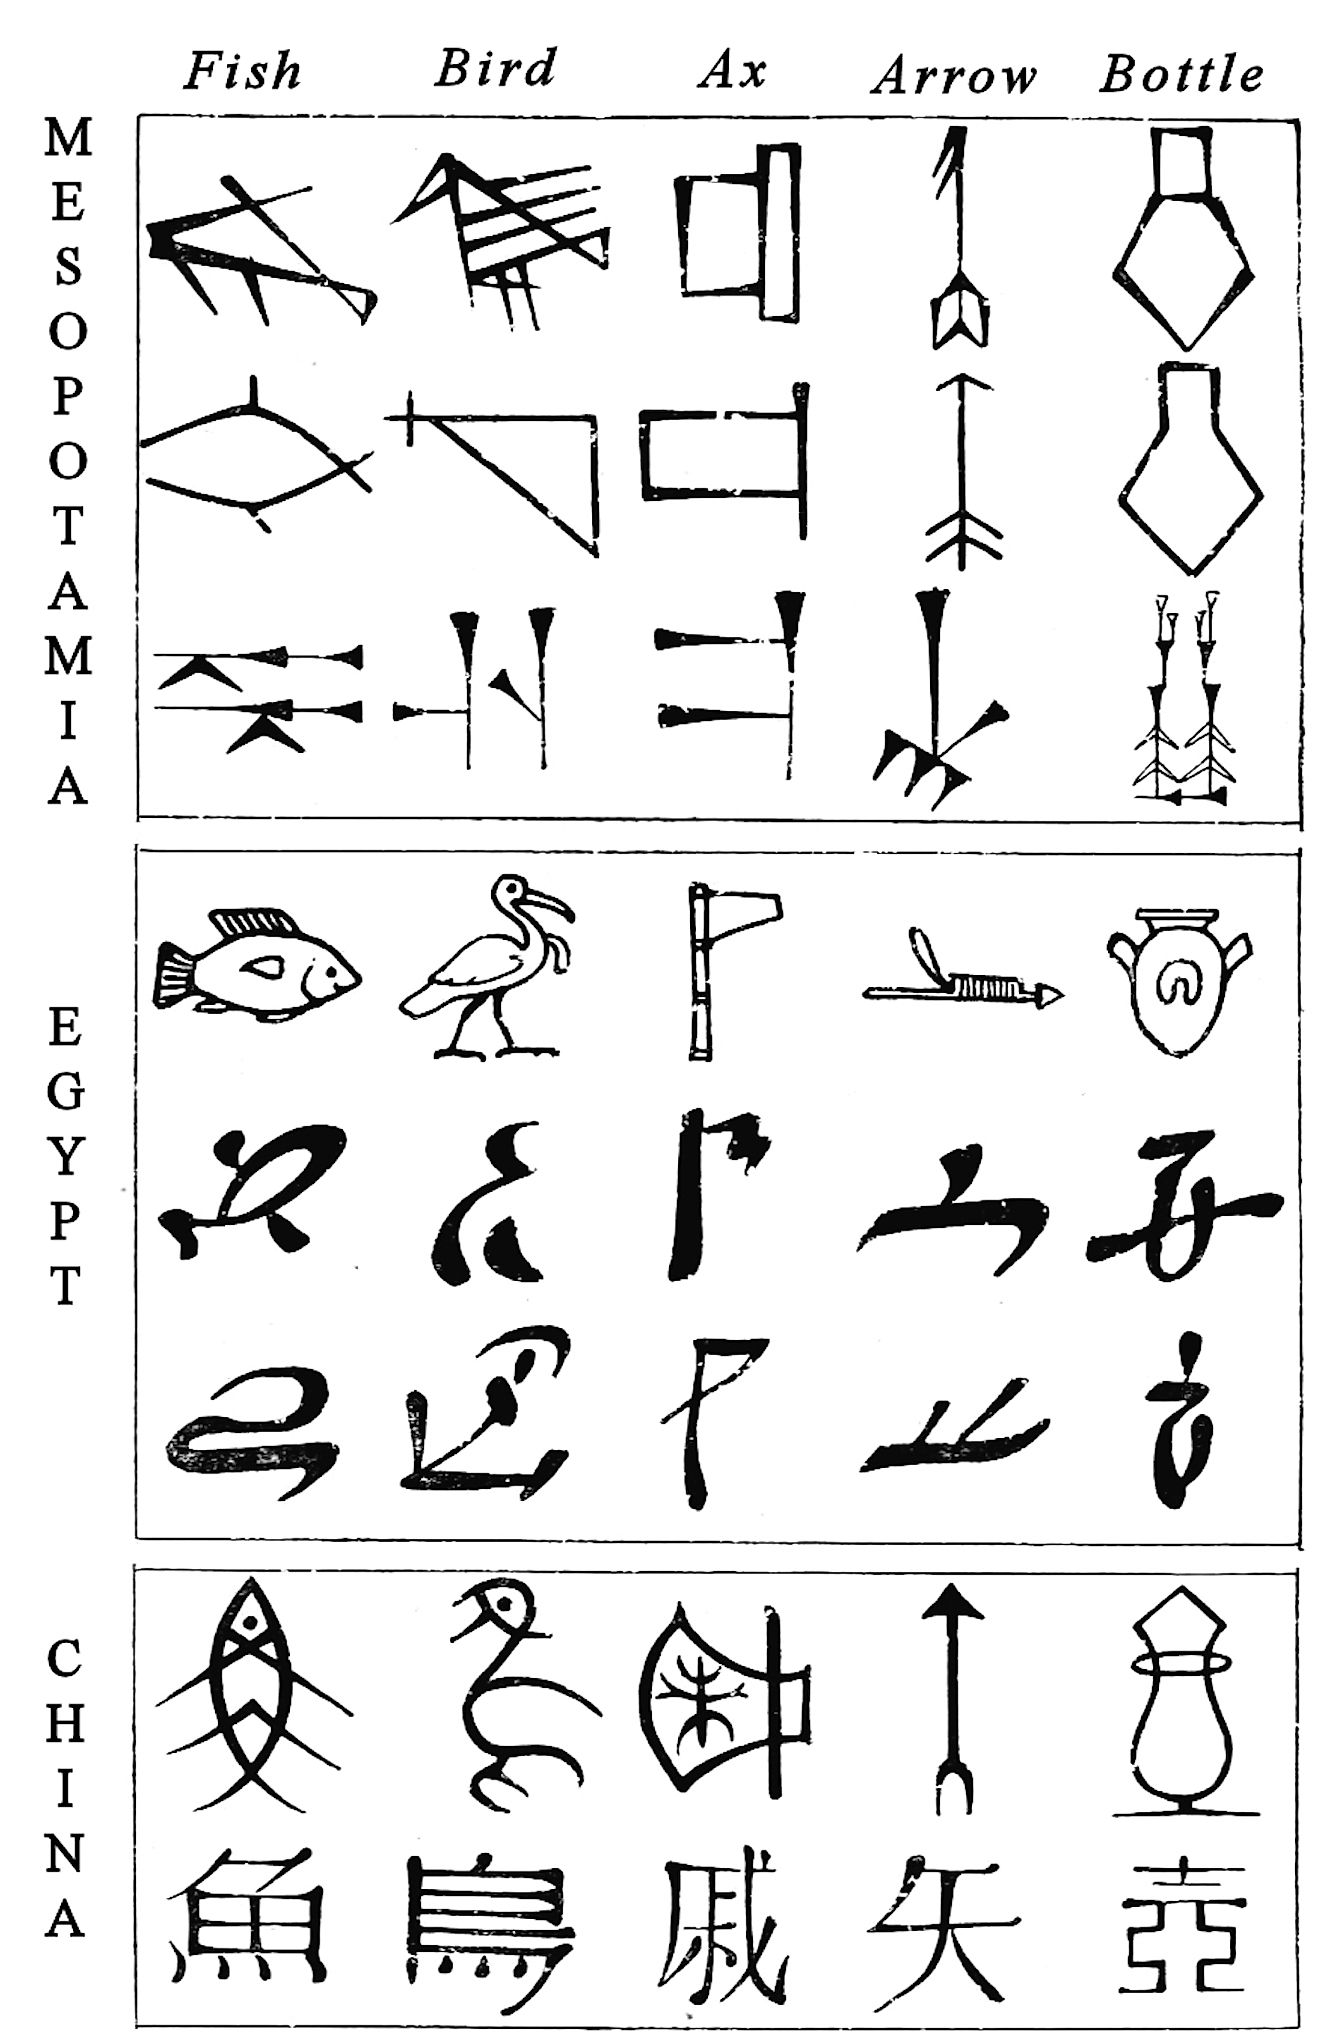 Comparative evolution from pictograms to abstract shapes, in cuneiform, Egyptian and Chinese characters. Image credit: Maspero, G. (Gaston), 1846-1916/Public domain